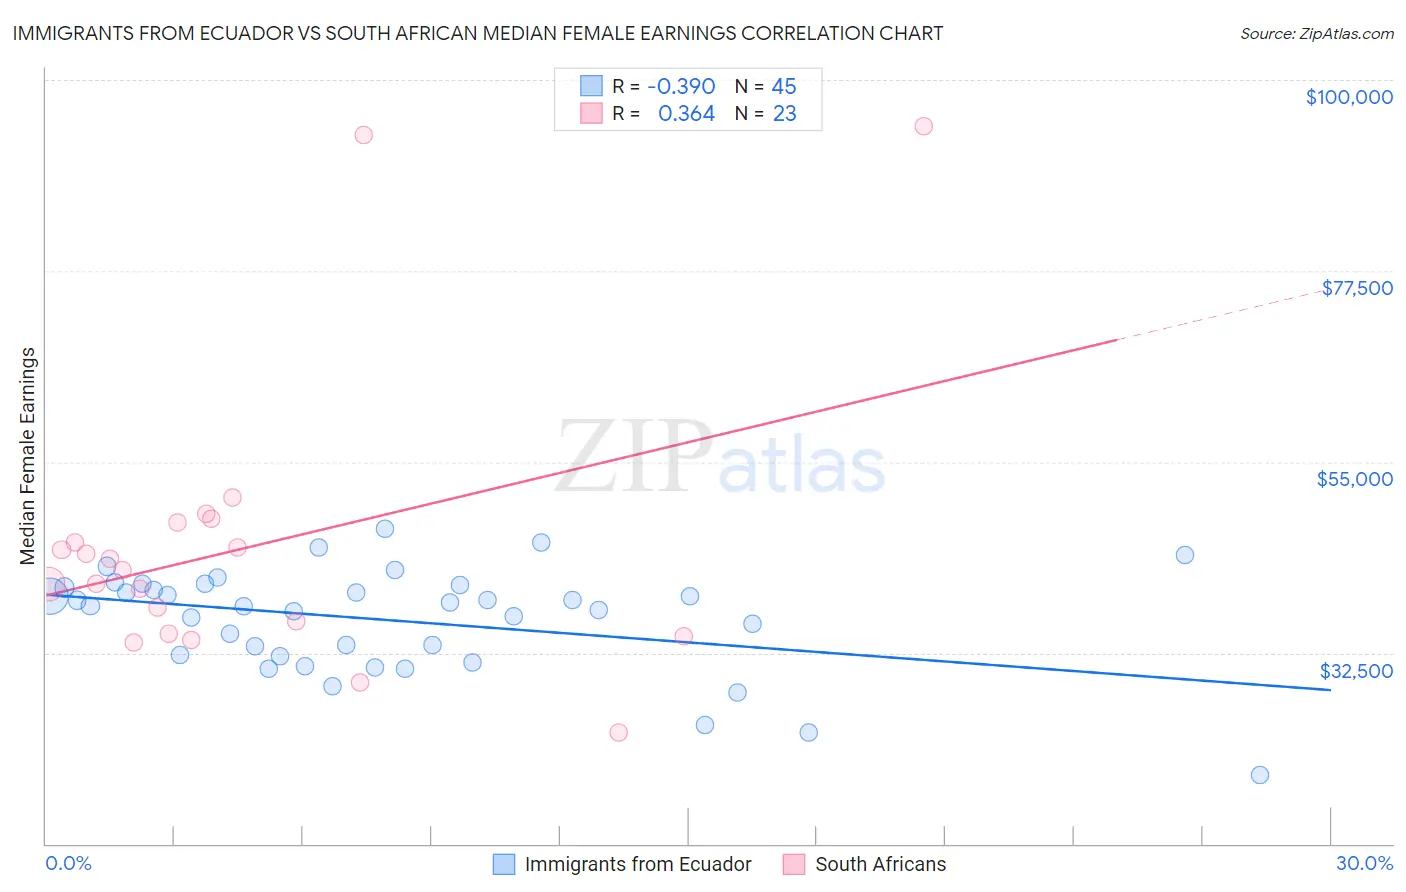 Immigrants from Ecuador vs South African Median Female Earnings